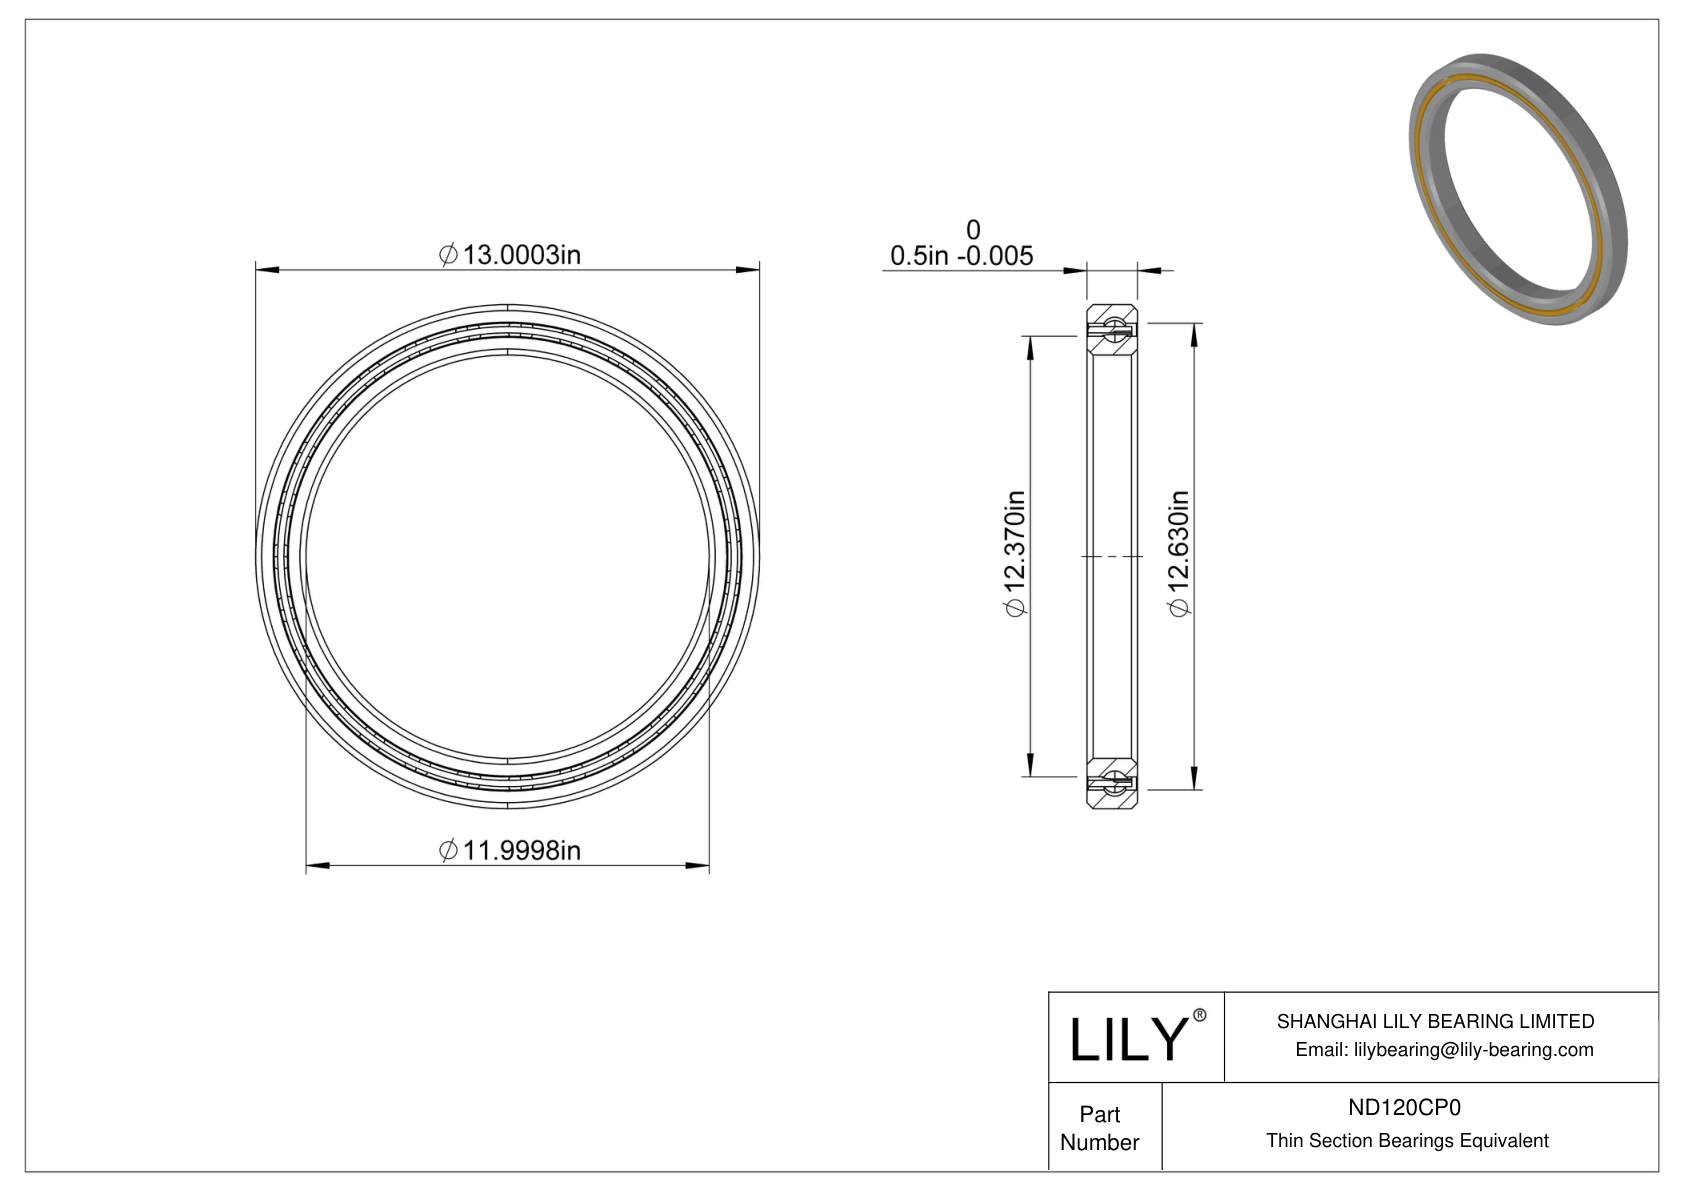 ND120CP0 Constant Section (CS) Bearings cad drawing